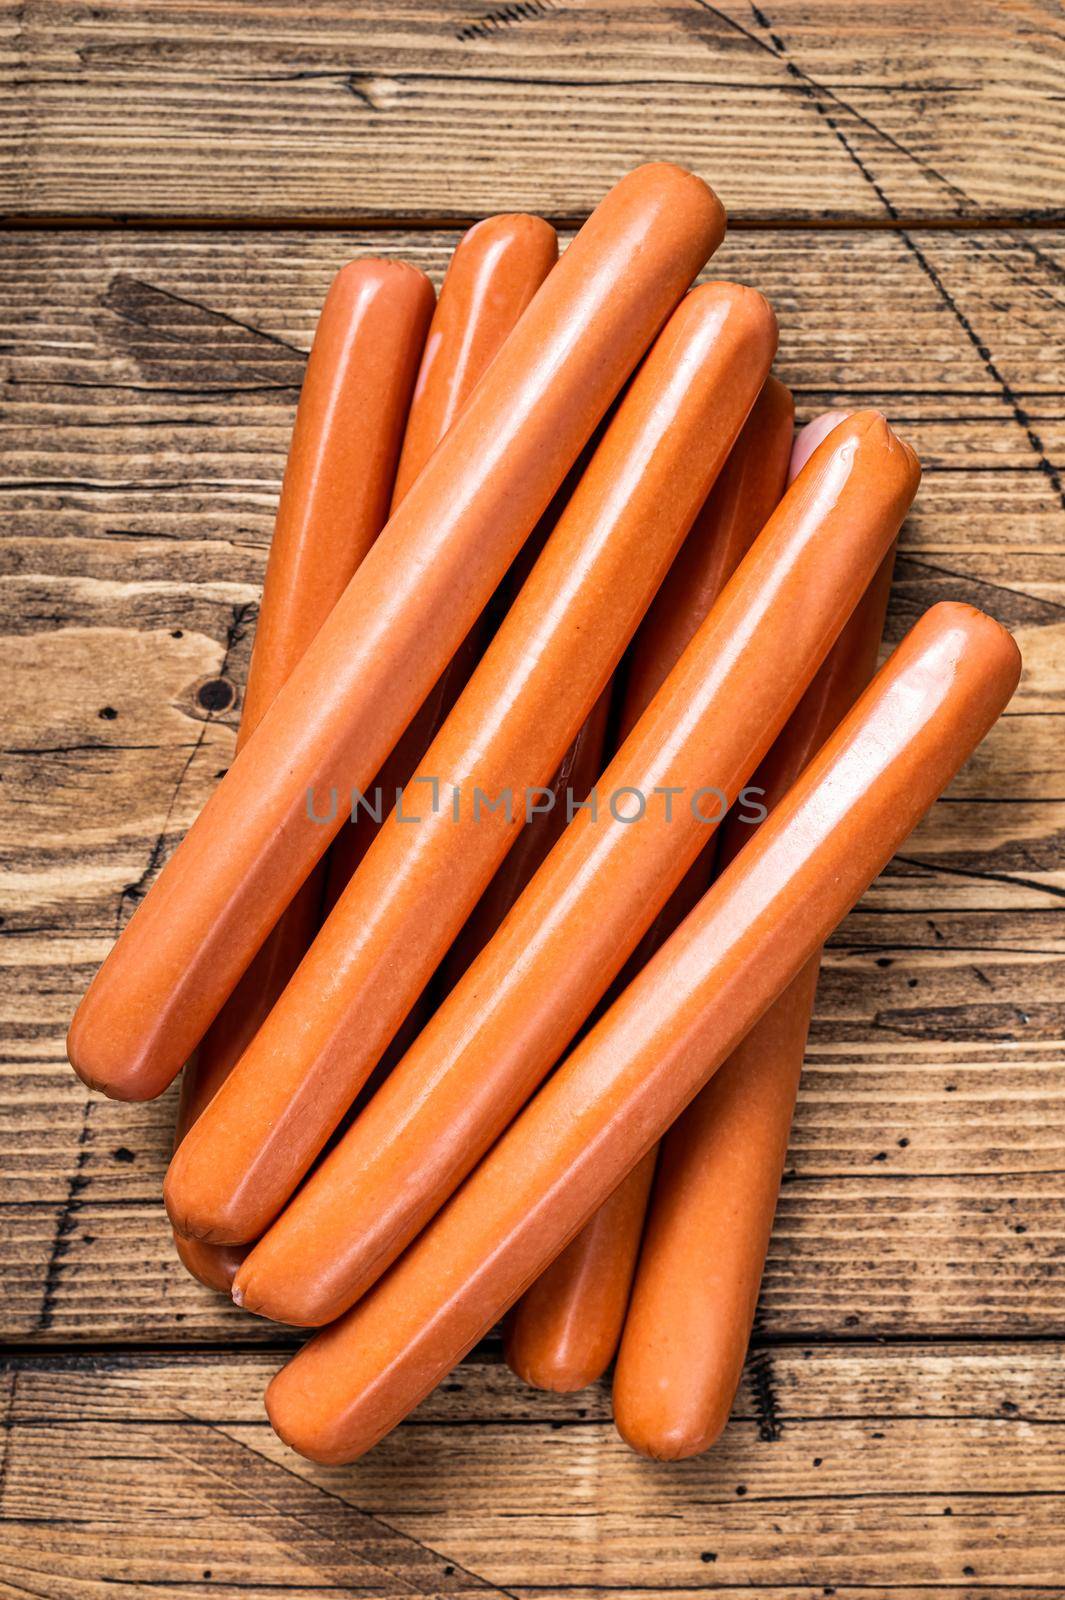 Raw frankfurter sausages on kitchen table. Wooden background. Top view.